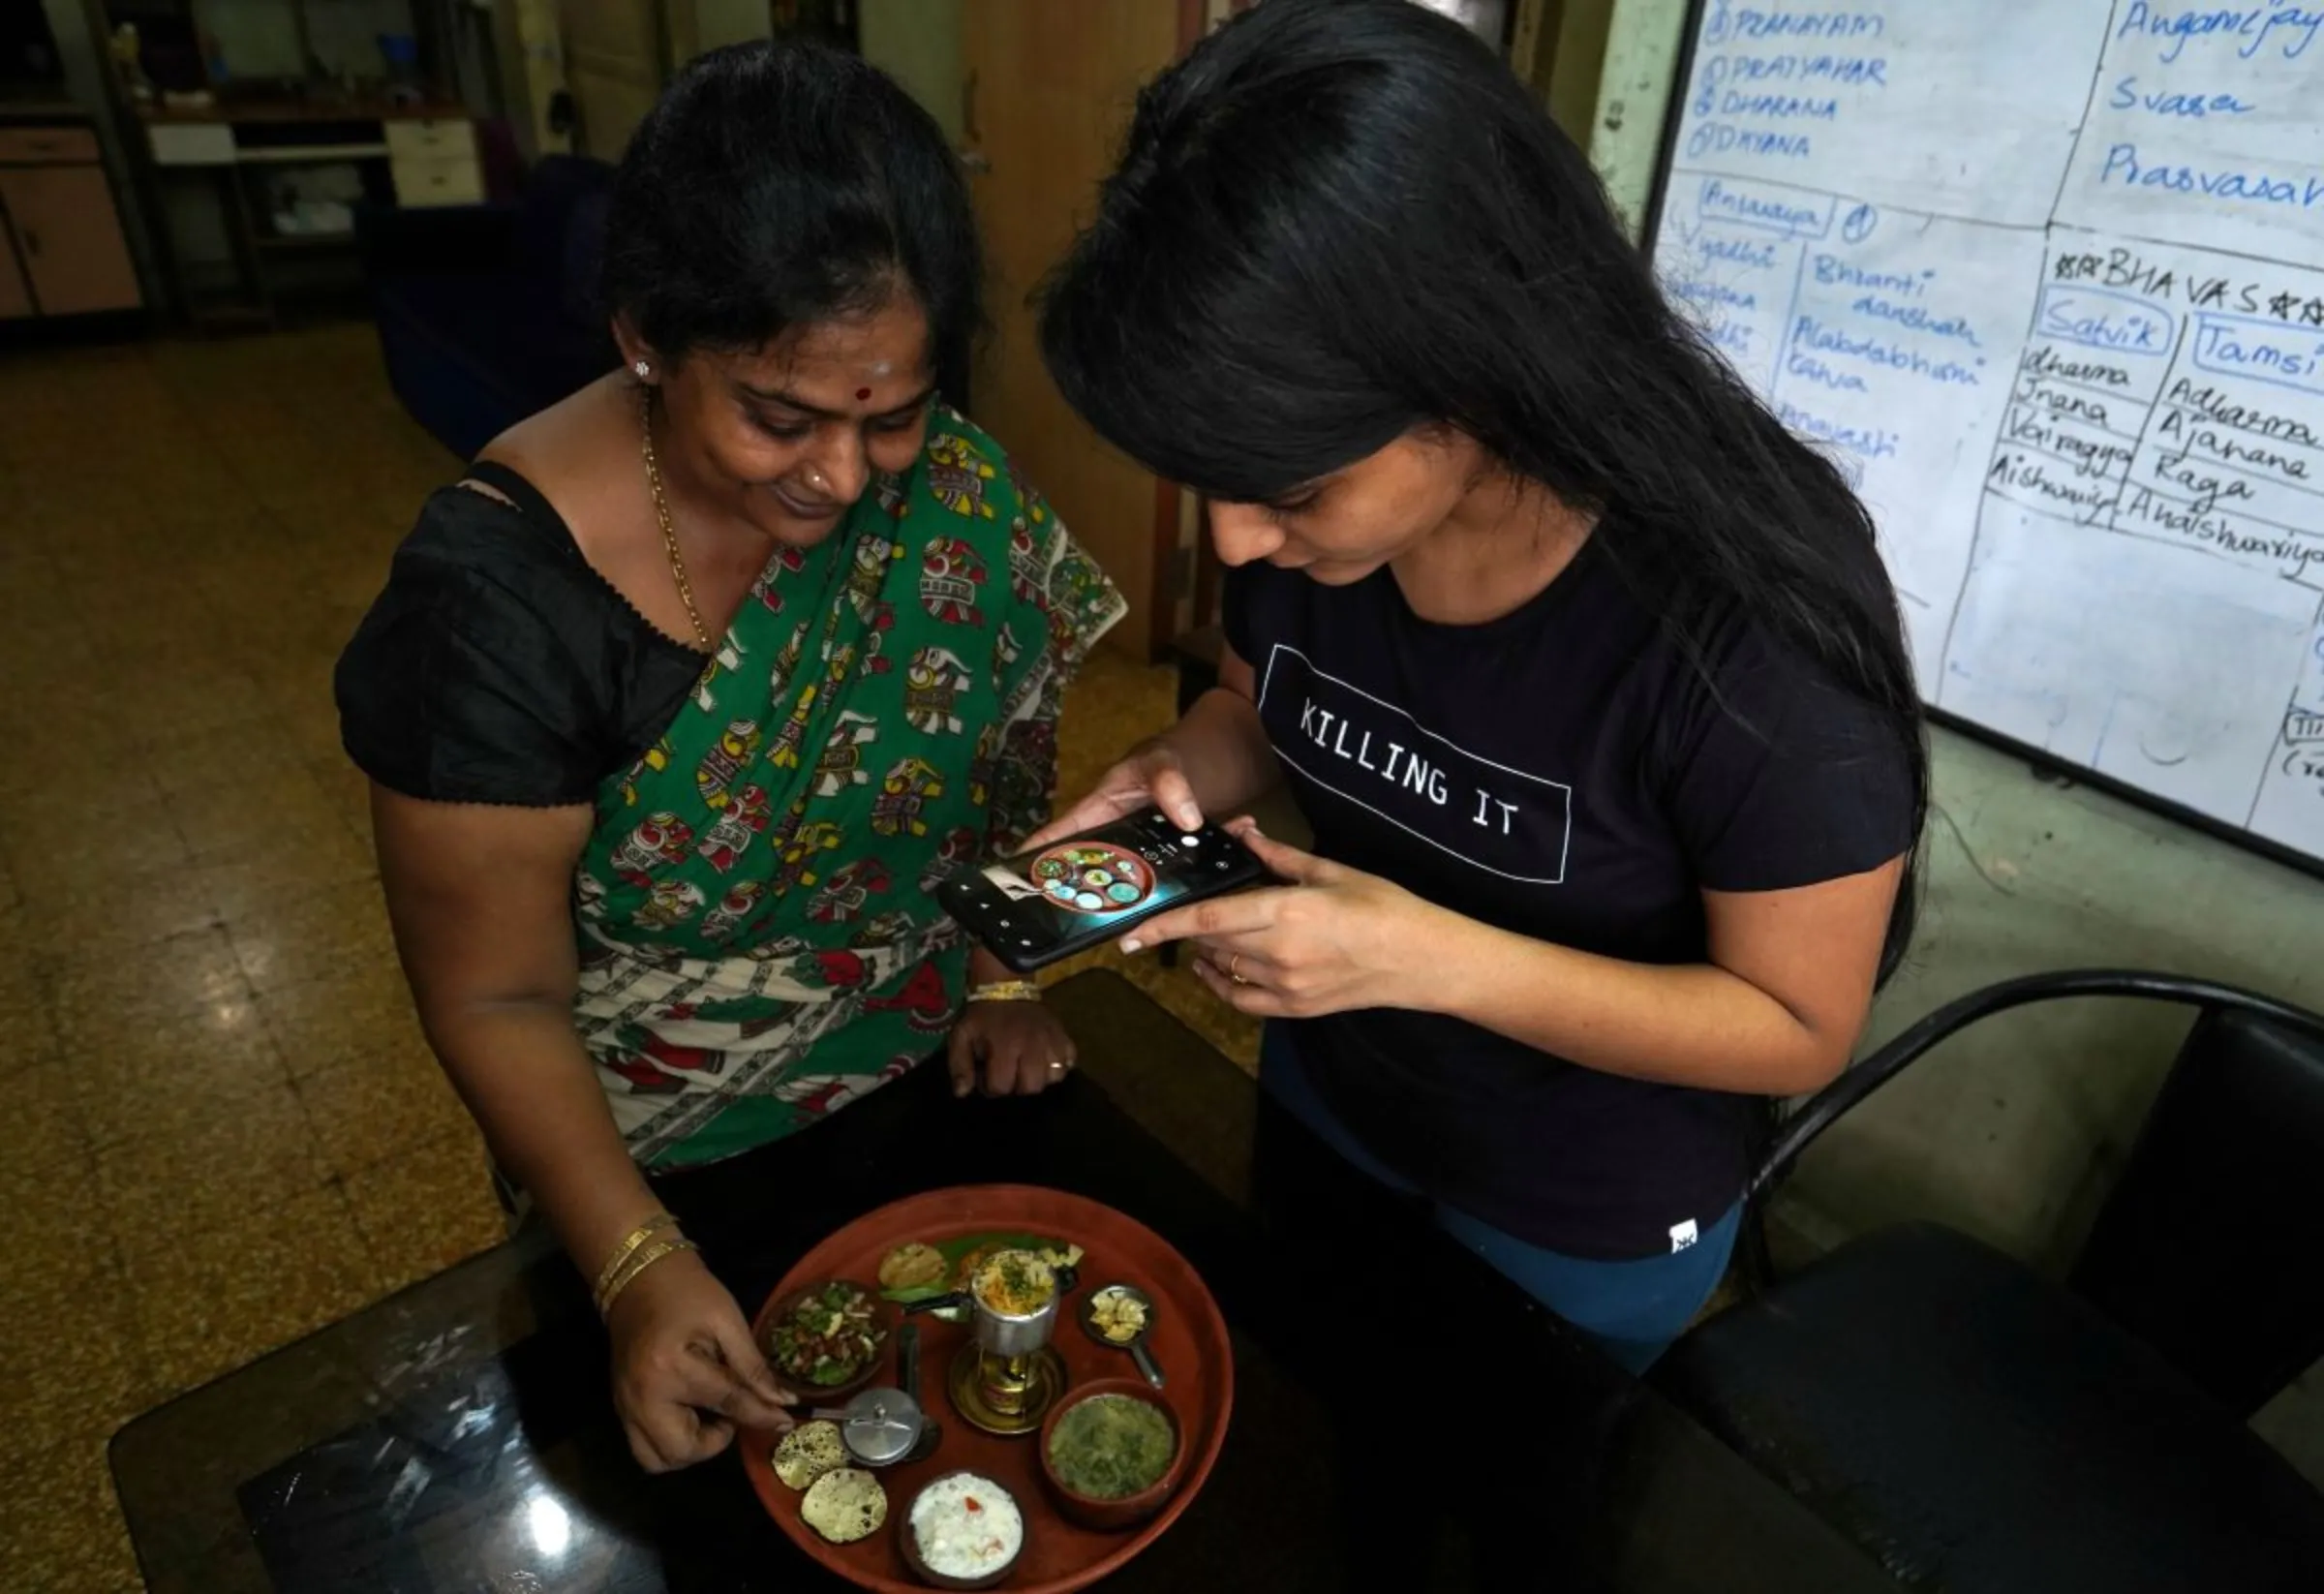 A woman who used to post over a dozen videos on video-sharing app TikTok, makes a video on her miniature cooking with her daughter that she will upload on an Indian app, after India banned dozens of Chinese apps including TikTok following a border clash between the two nations, inside their house in Mumbai, India, July 1, 2020. REUTERS/Hemanshi Kamani